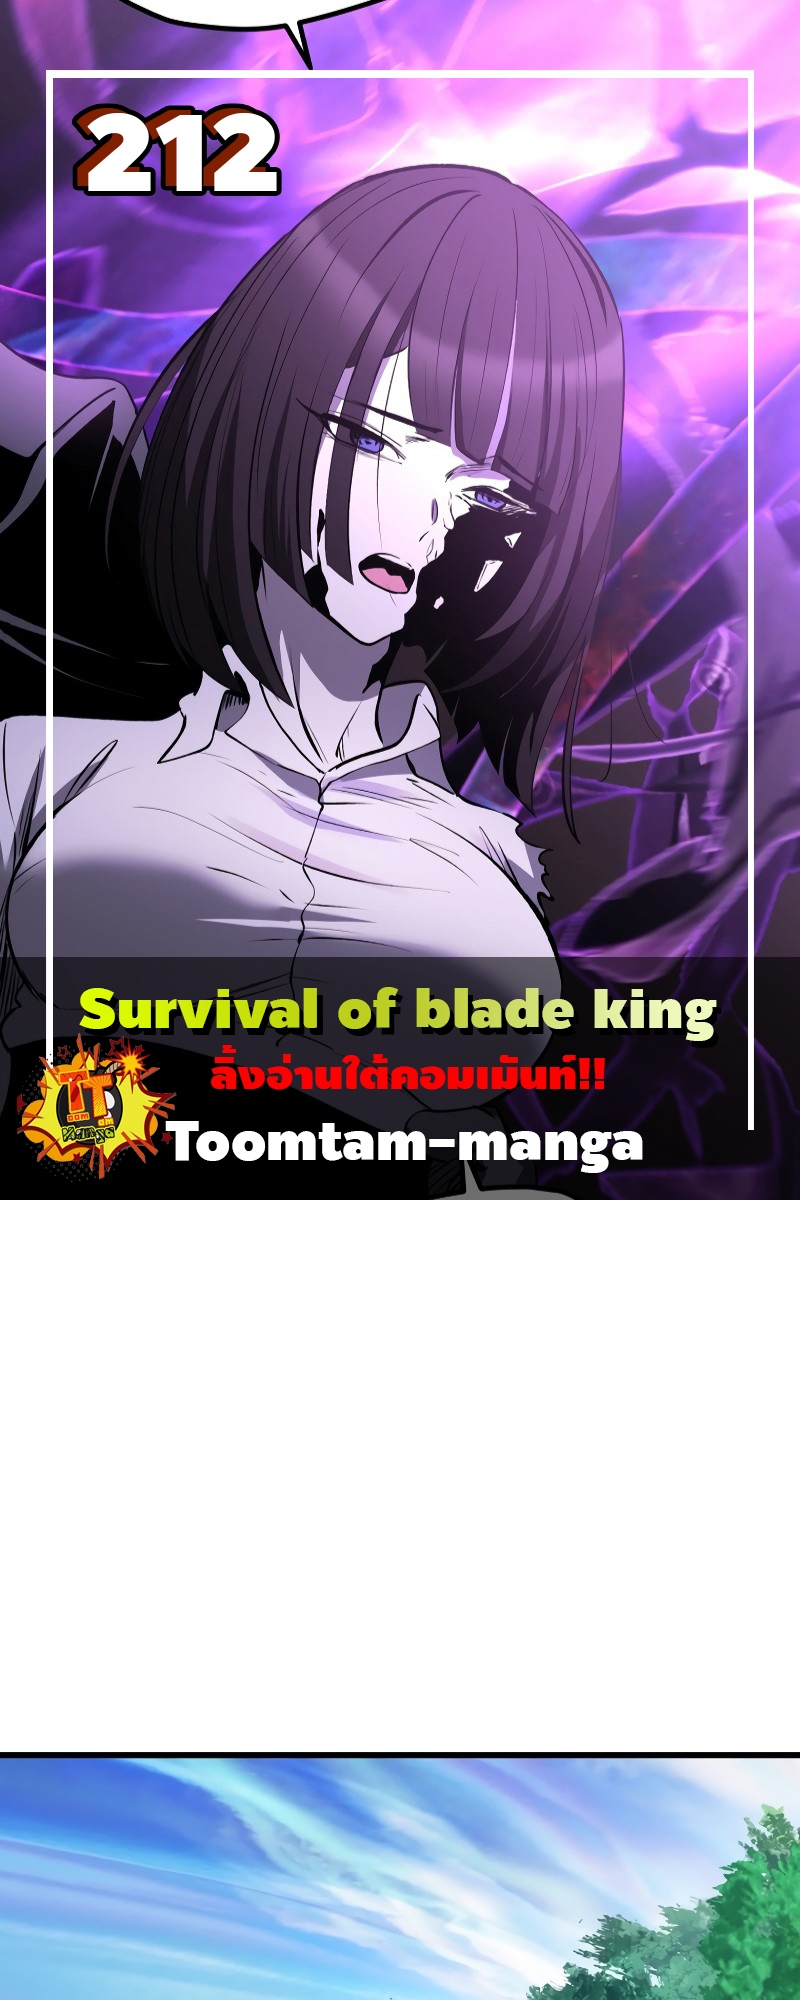 Survival of blade king 212 29 06 25670001